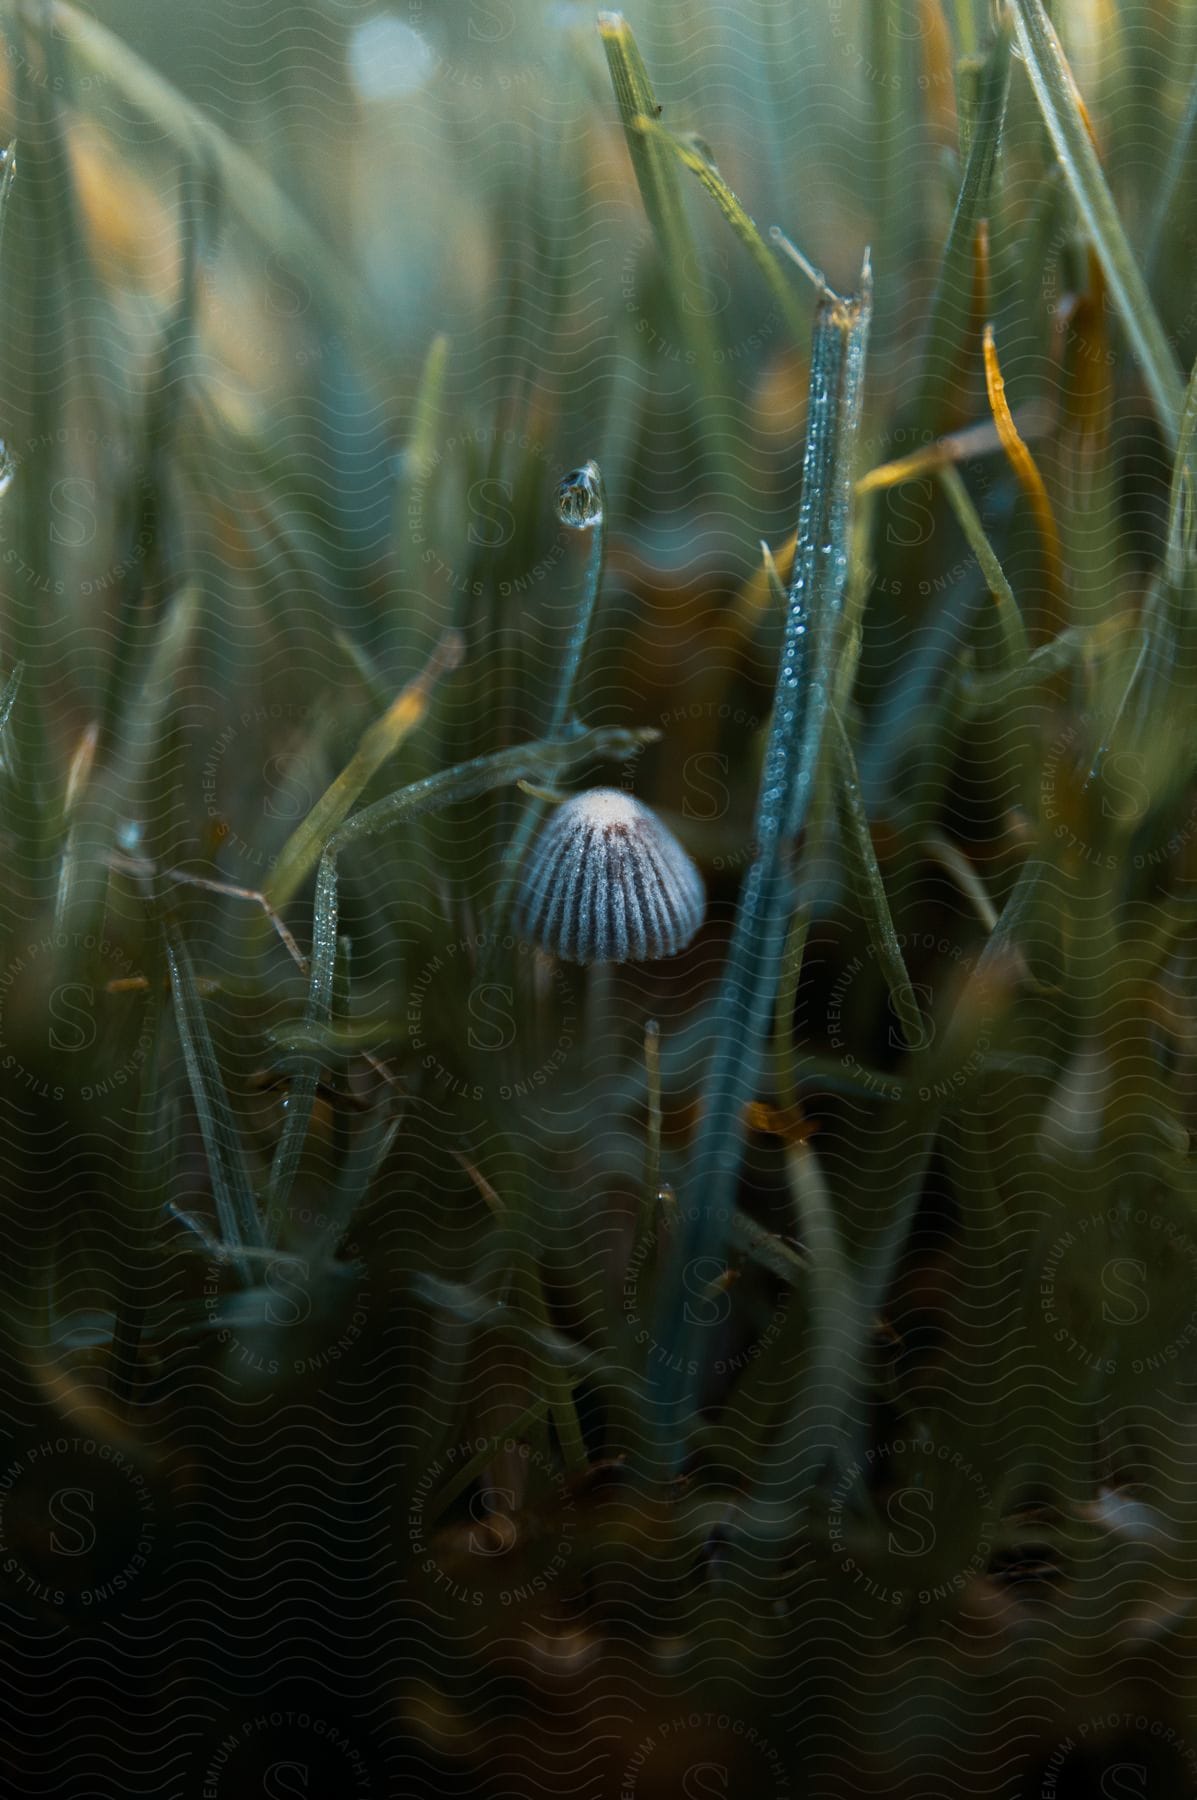 A mushroom growing in tall grass in a nature setting